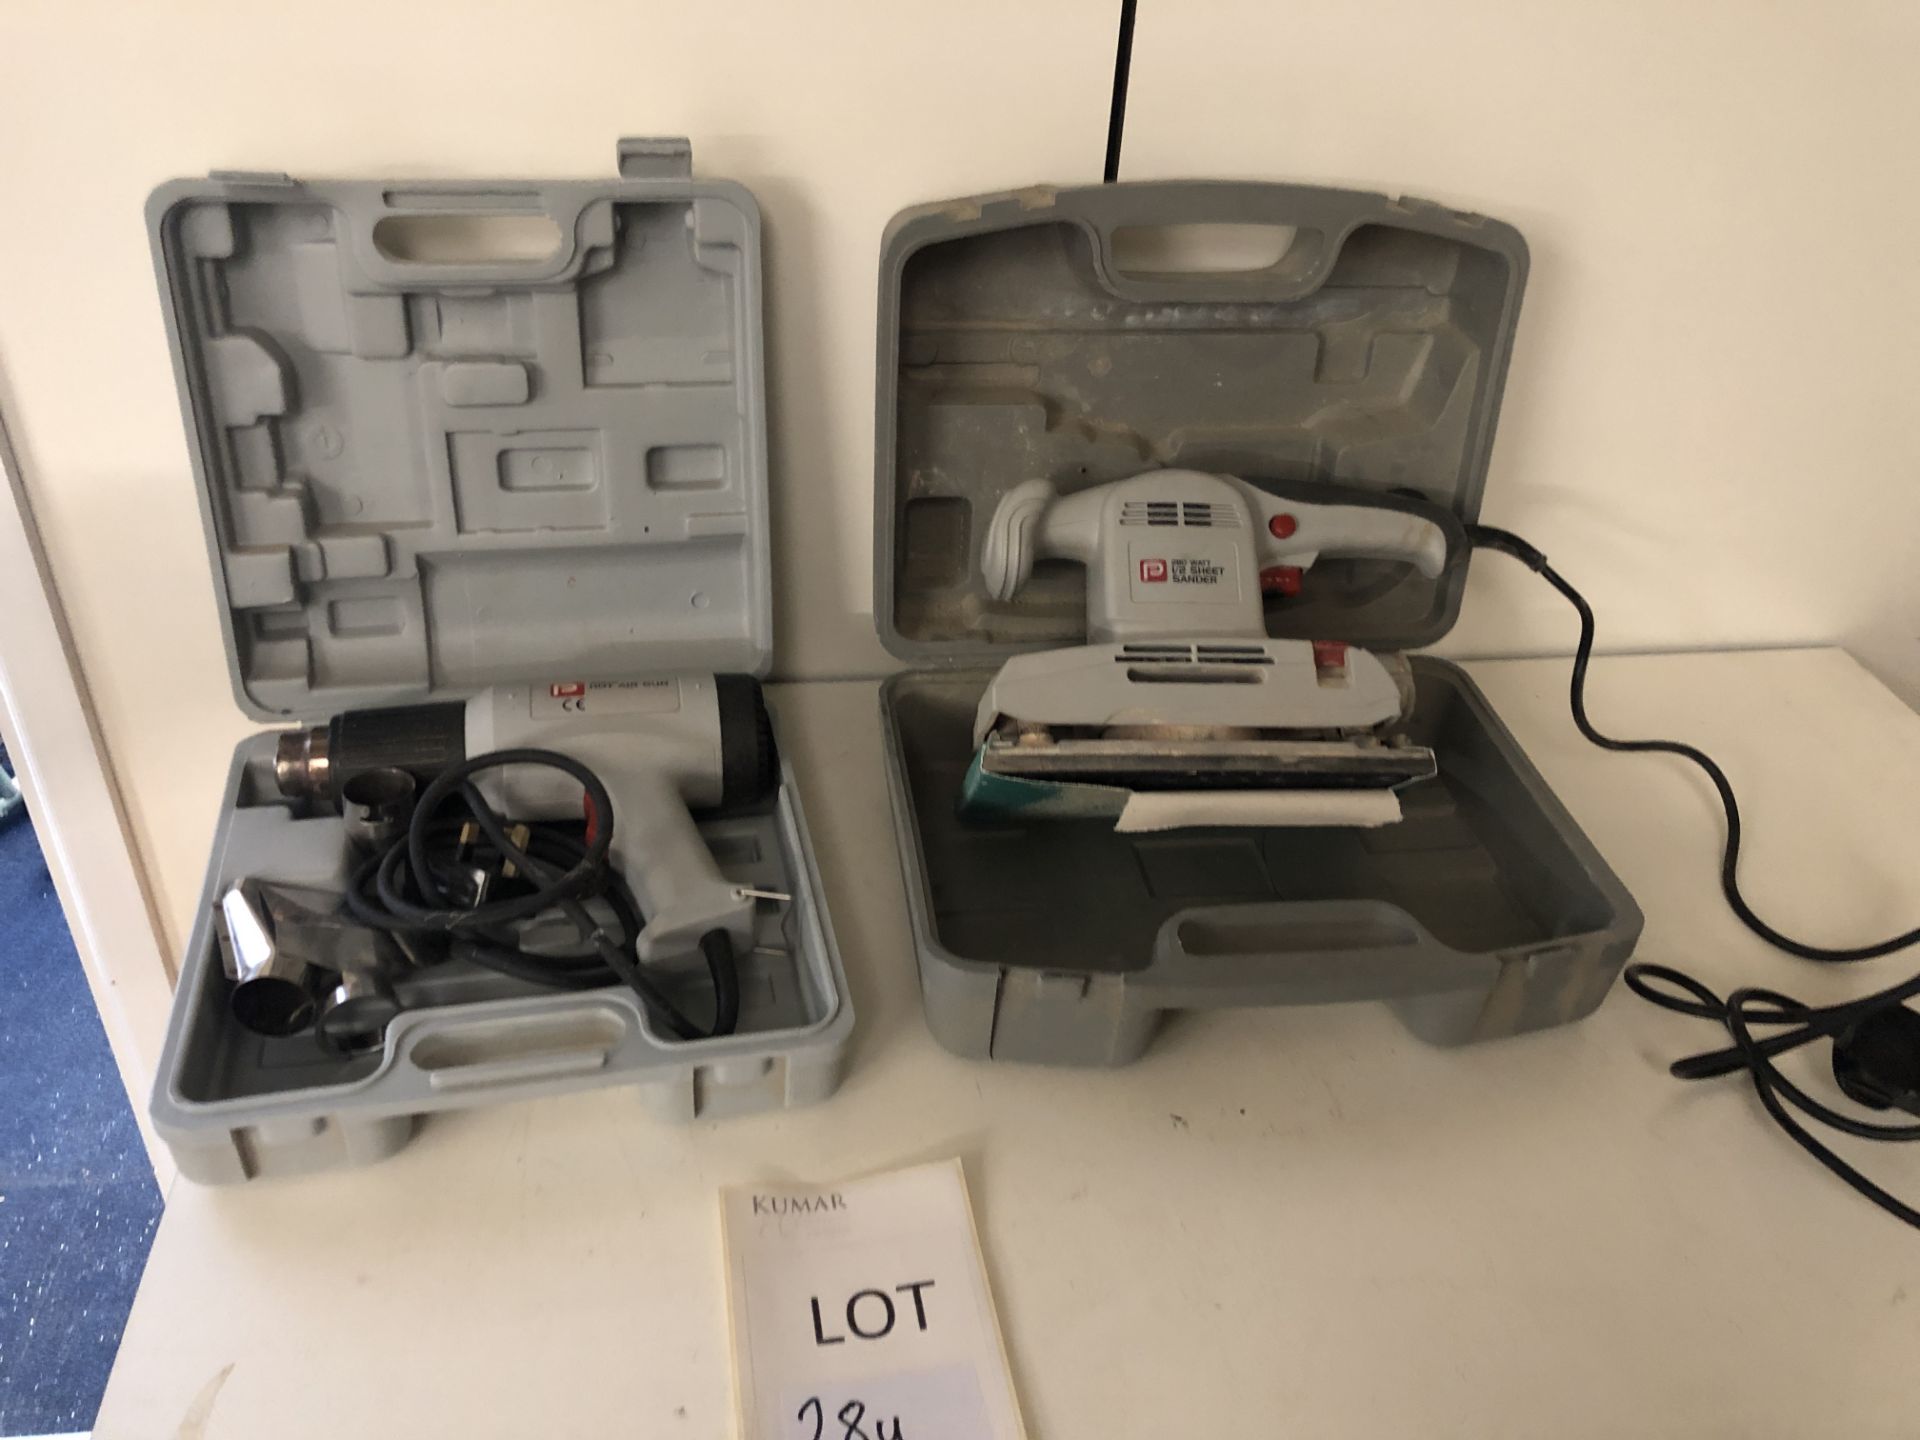 Borsch Hot Gun & Borsch Sheet Sander (Please Note: Collection by appointment Tuesday 26th March From